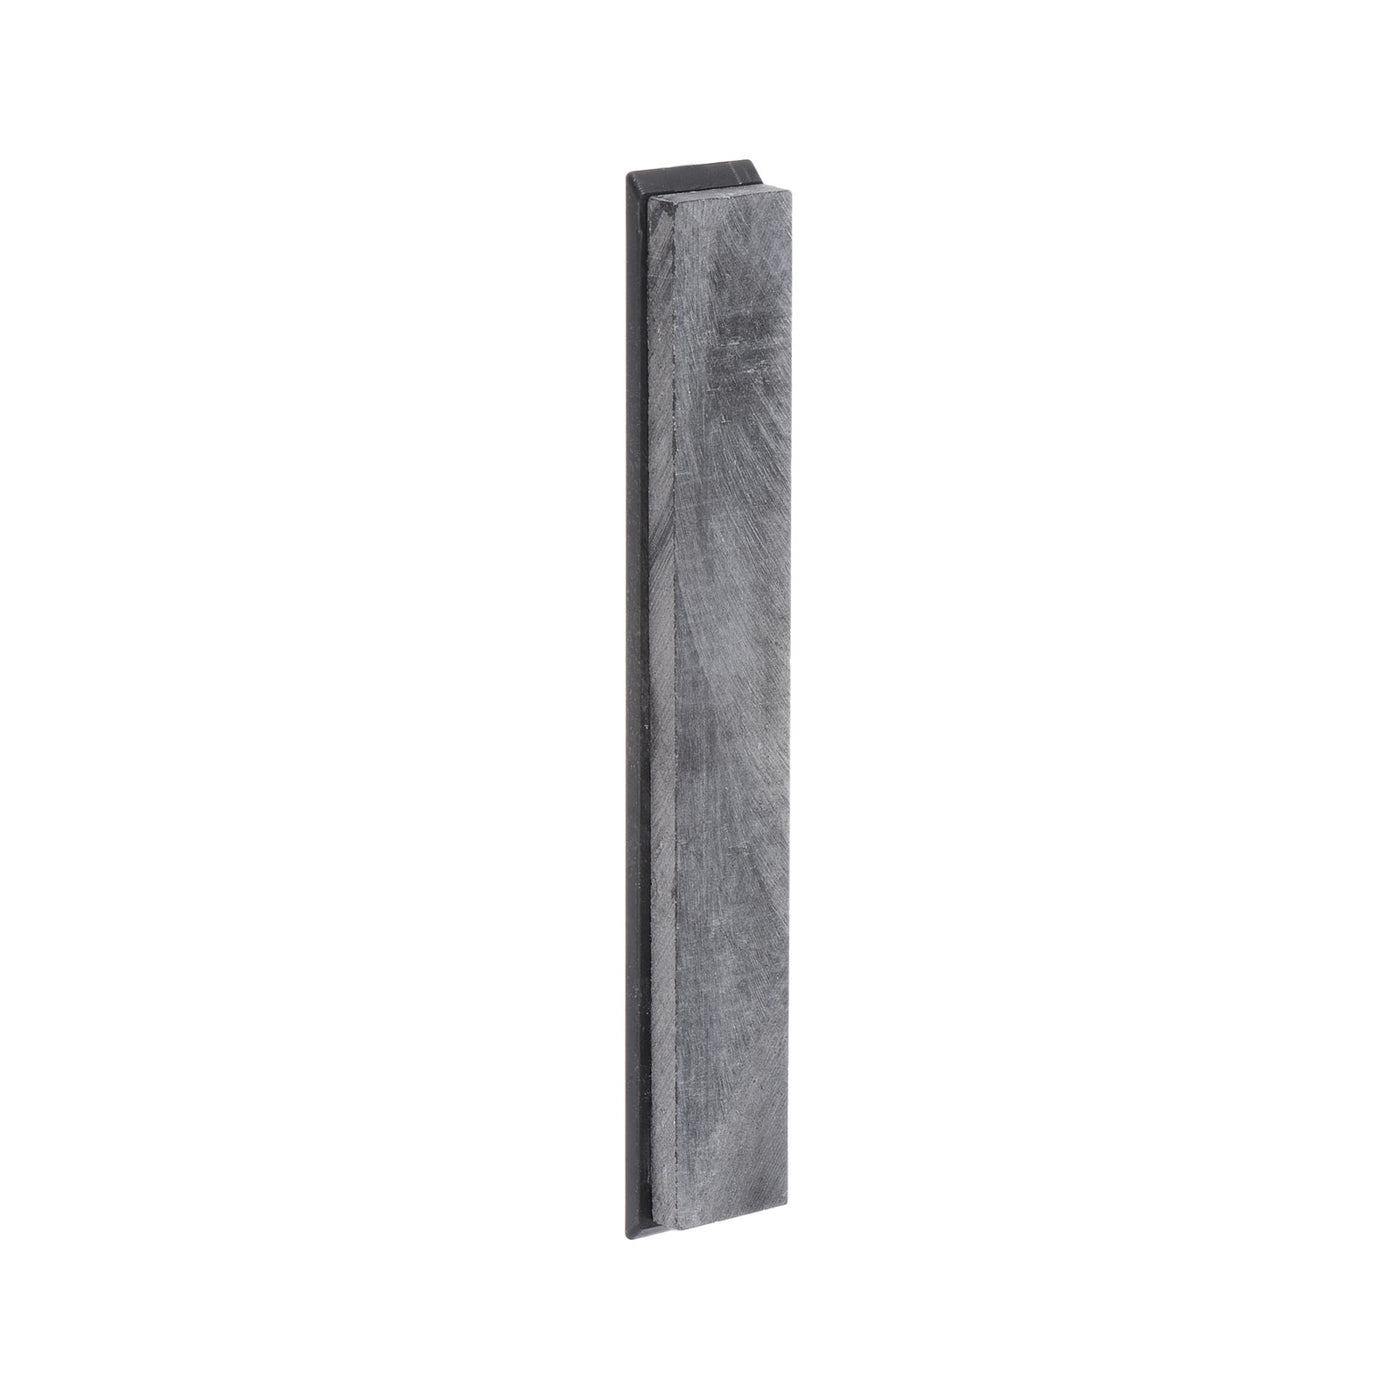 uxcell Uxcell Sharpening Stones 1000 Grit Black Whetstone 150mm x 20mm x 5mm with Base